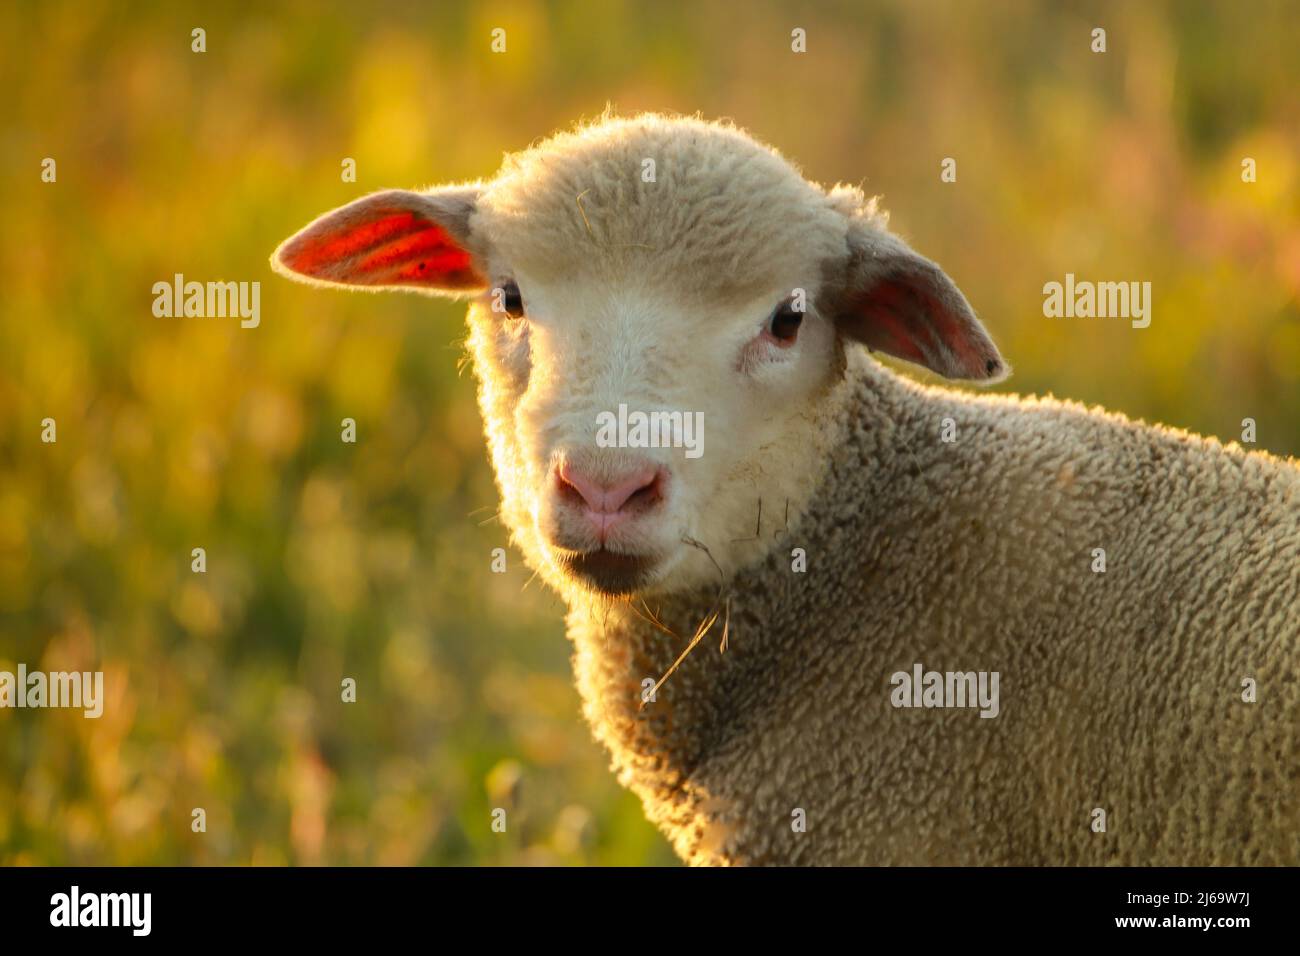 Baby sheep in a field Stock Photo